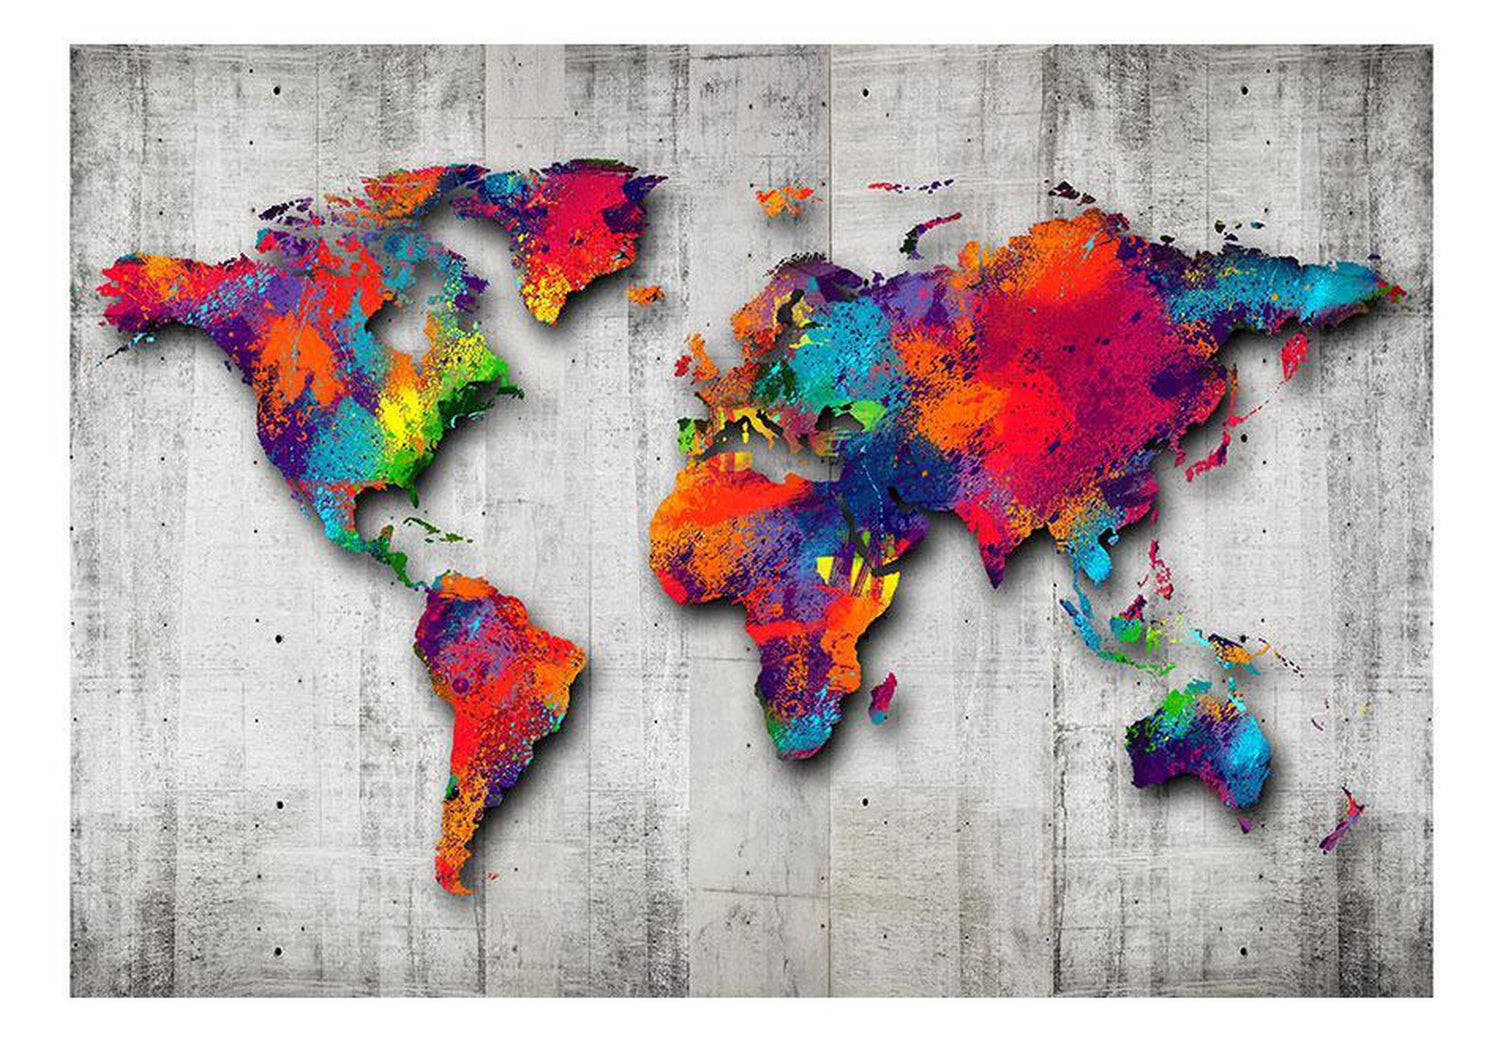 Peel and stick wall mural - Concrete World-TipTopHomeDecor